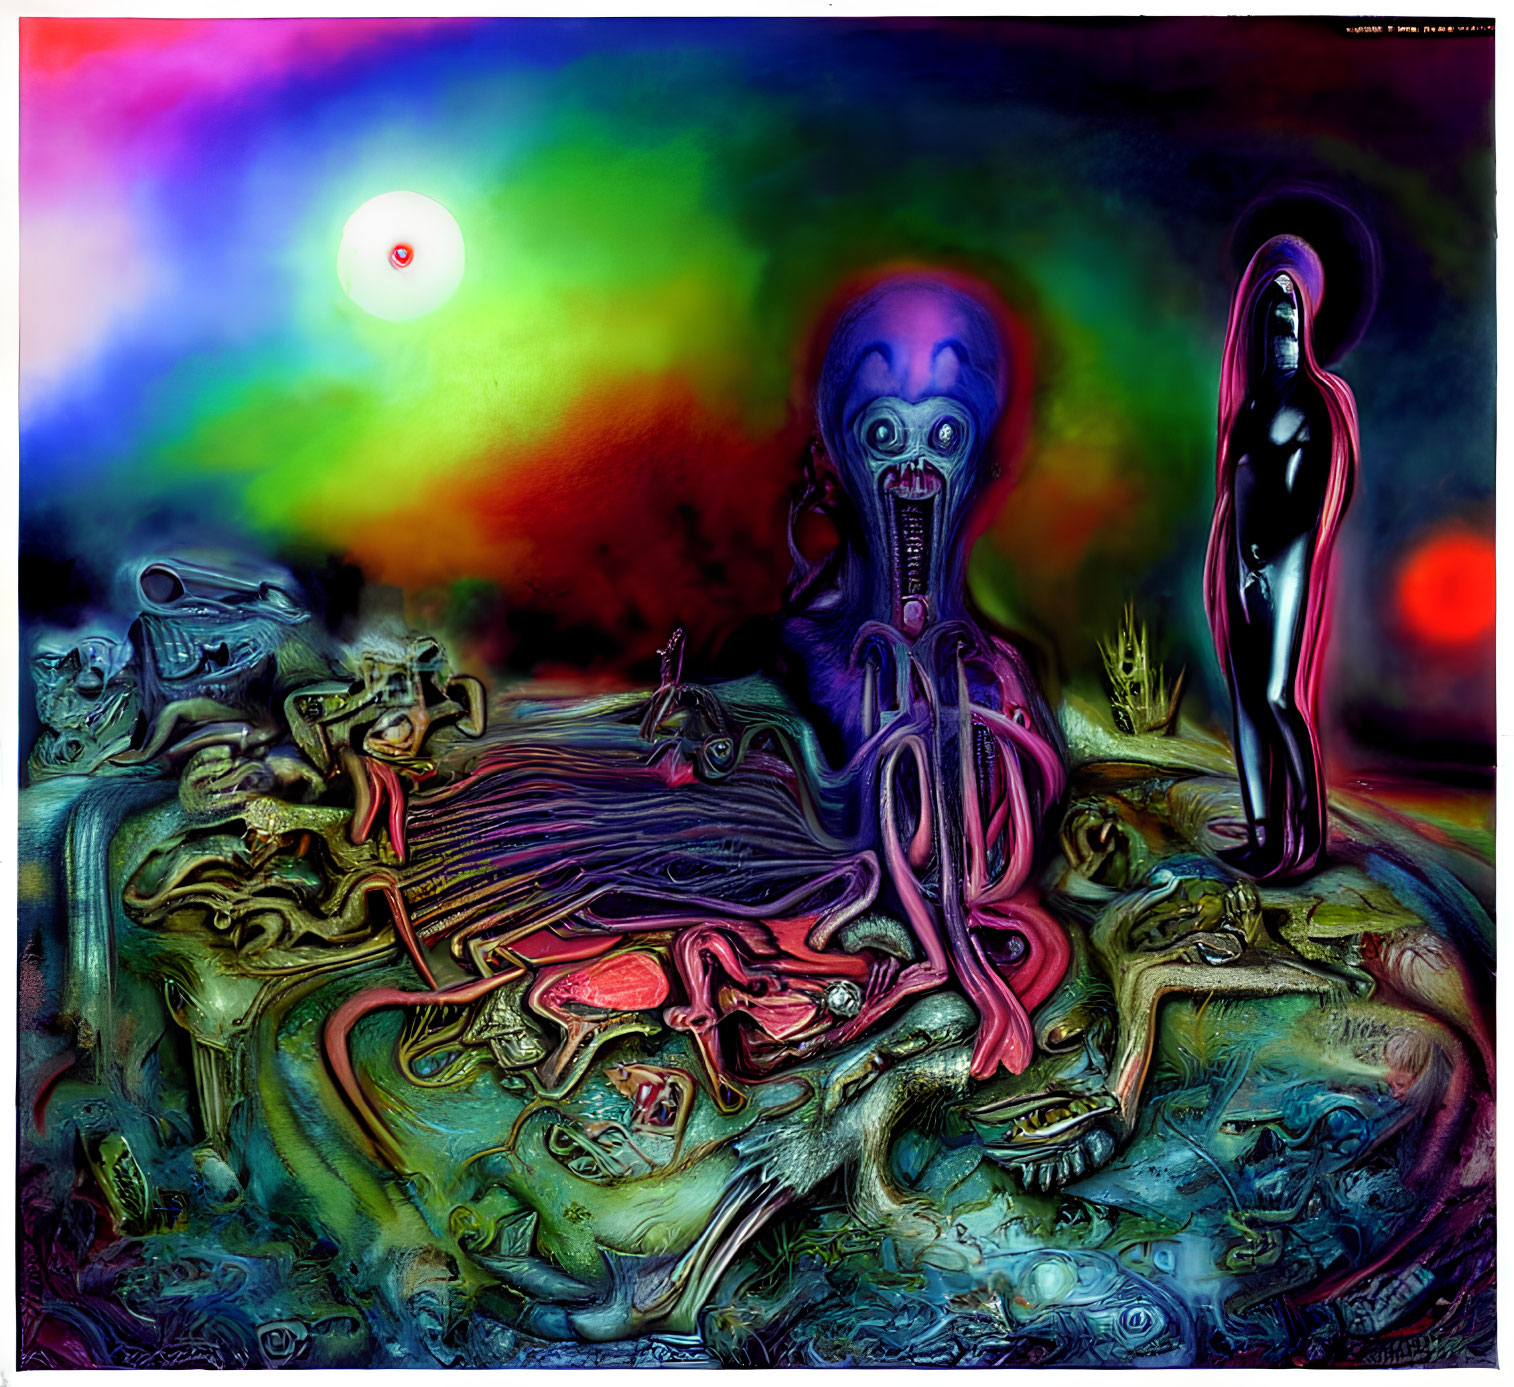 Vibrant surreal artwork: humanoid figure with tentacles in dreamlike landscape